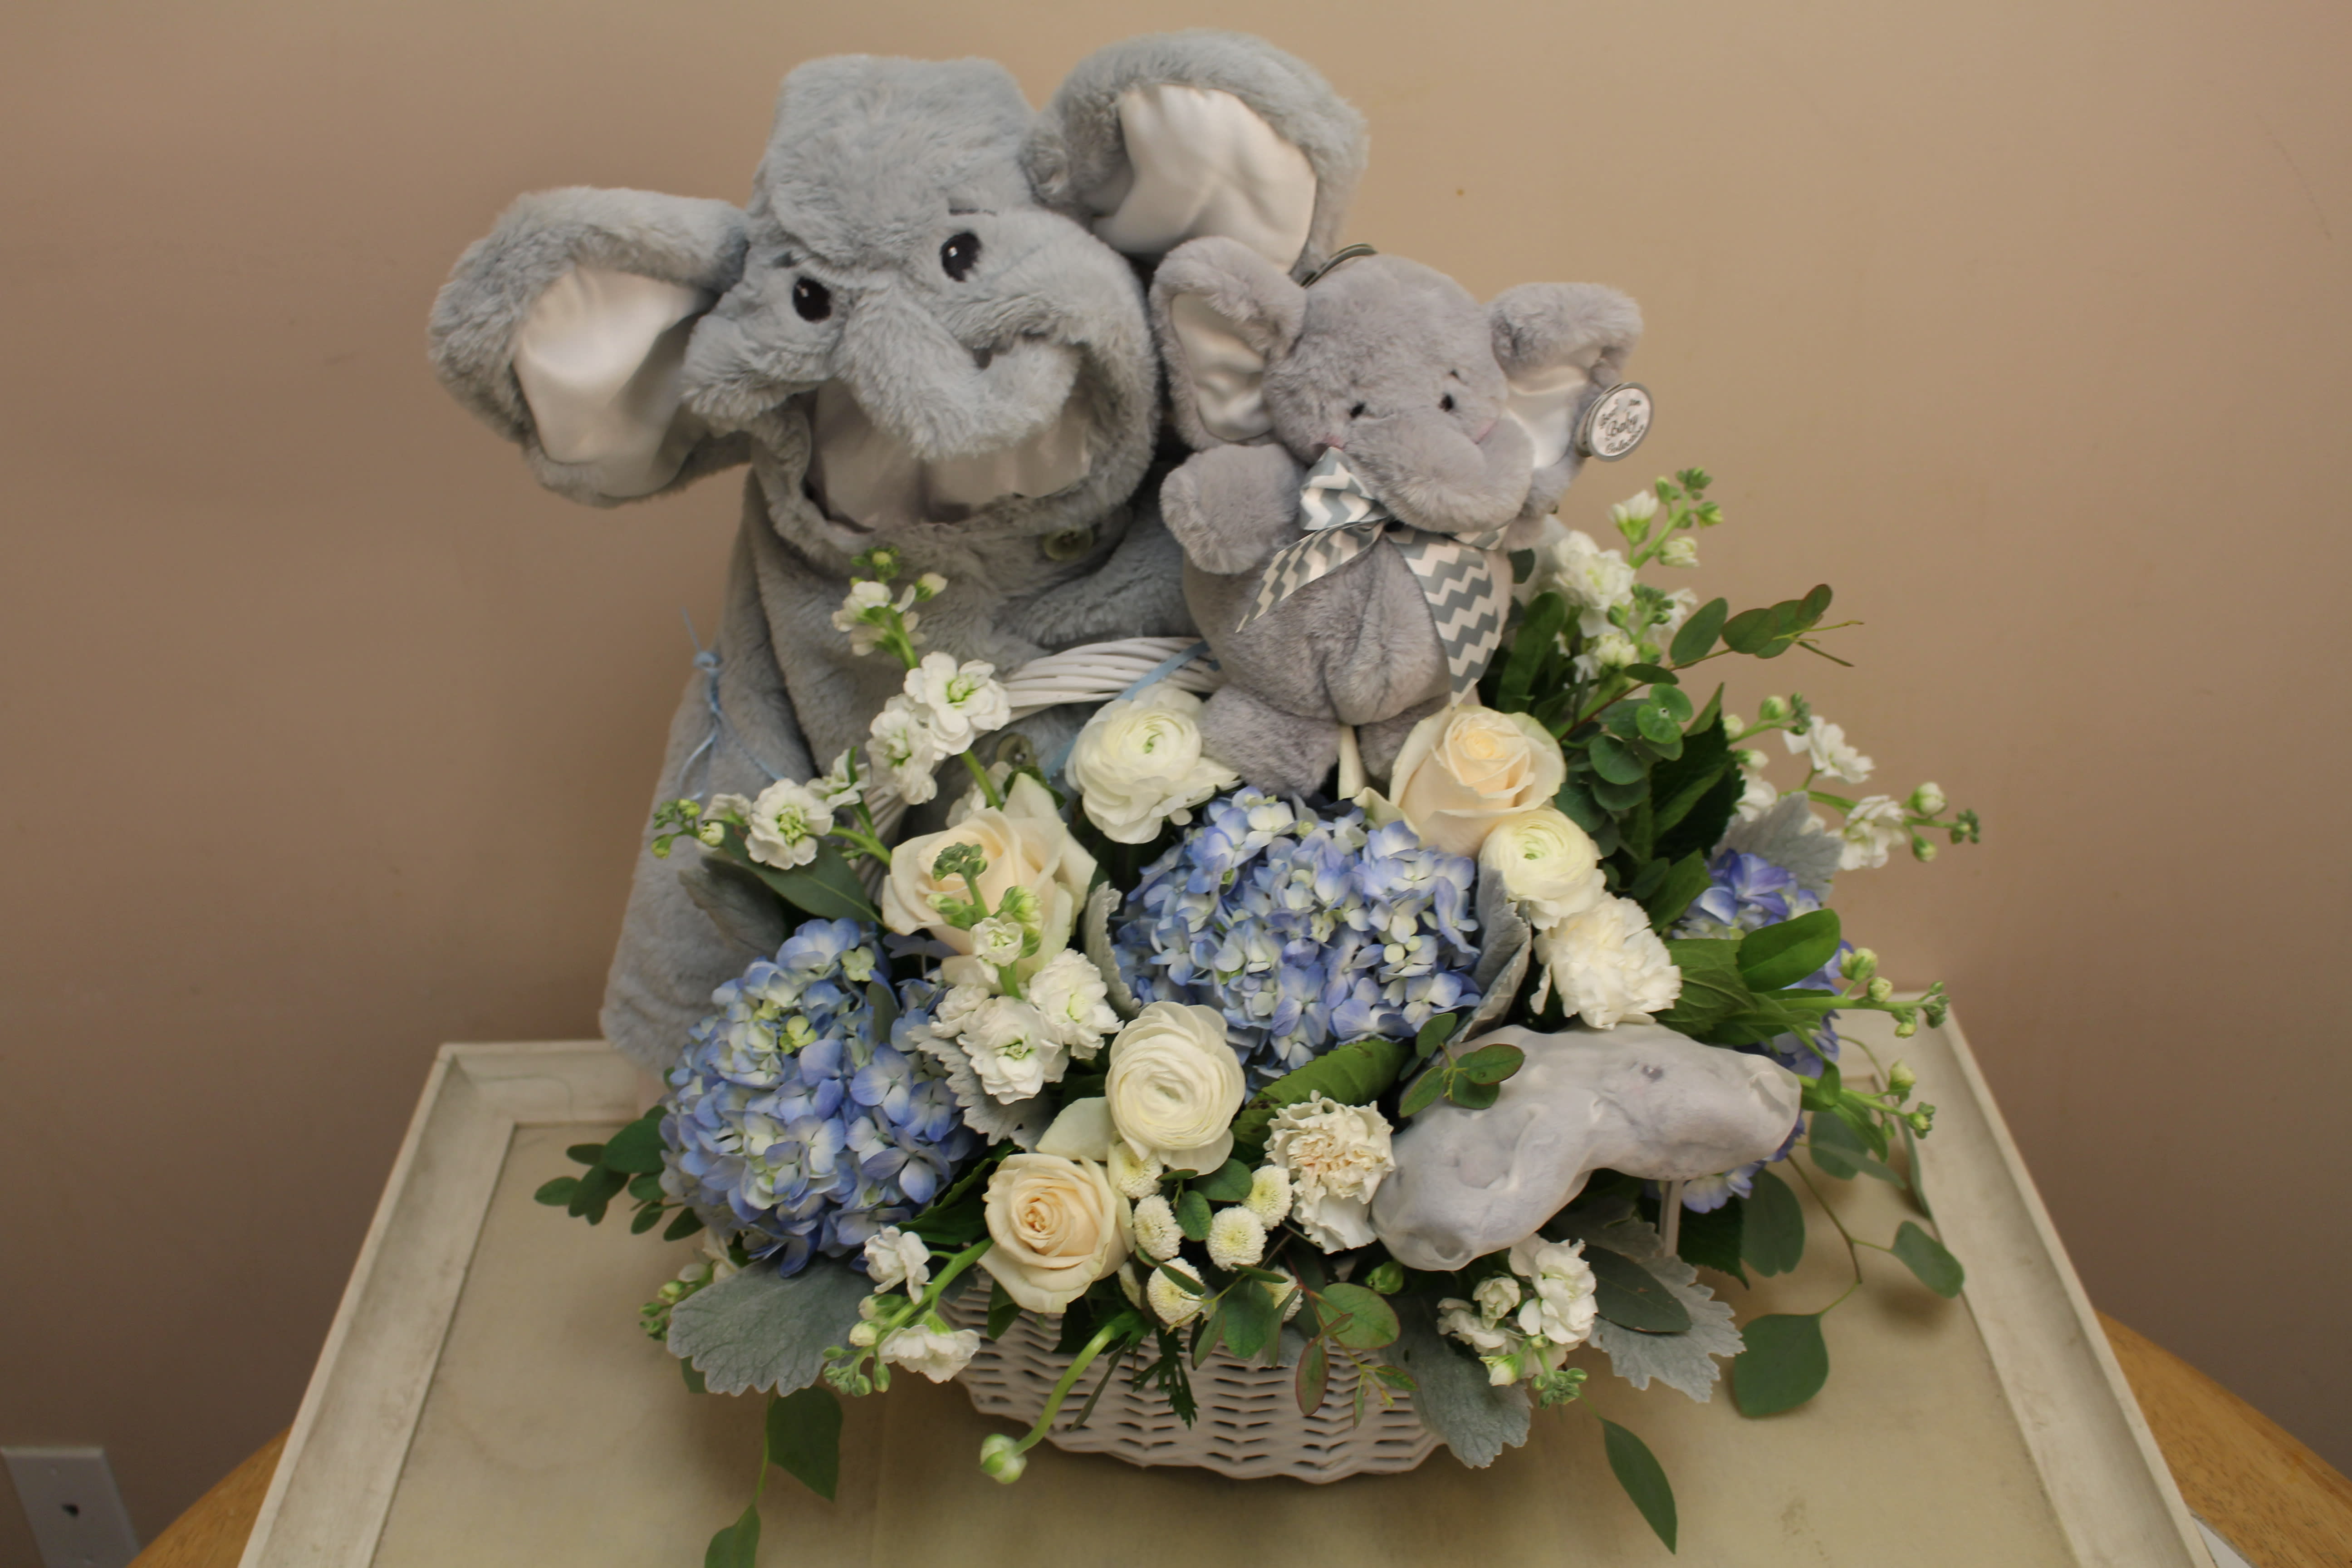 Lil’ Spout Gray Elephant  - What A wow factor!  A baby boy elephant, jacket, plush animal and booties  filled with a flower arrangement